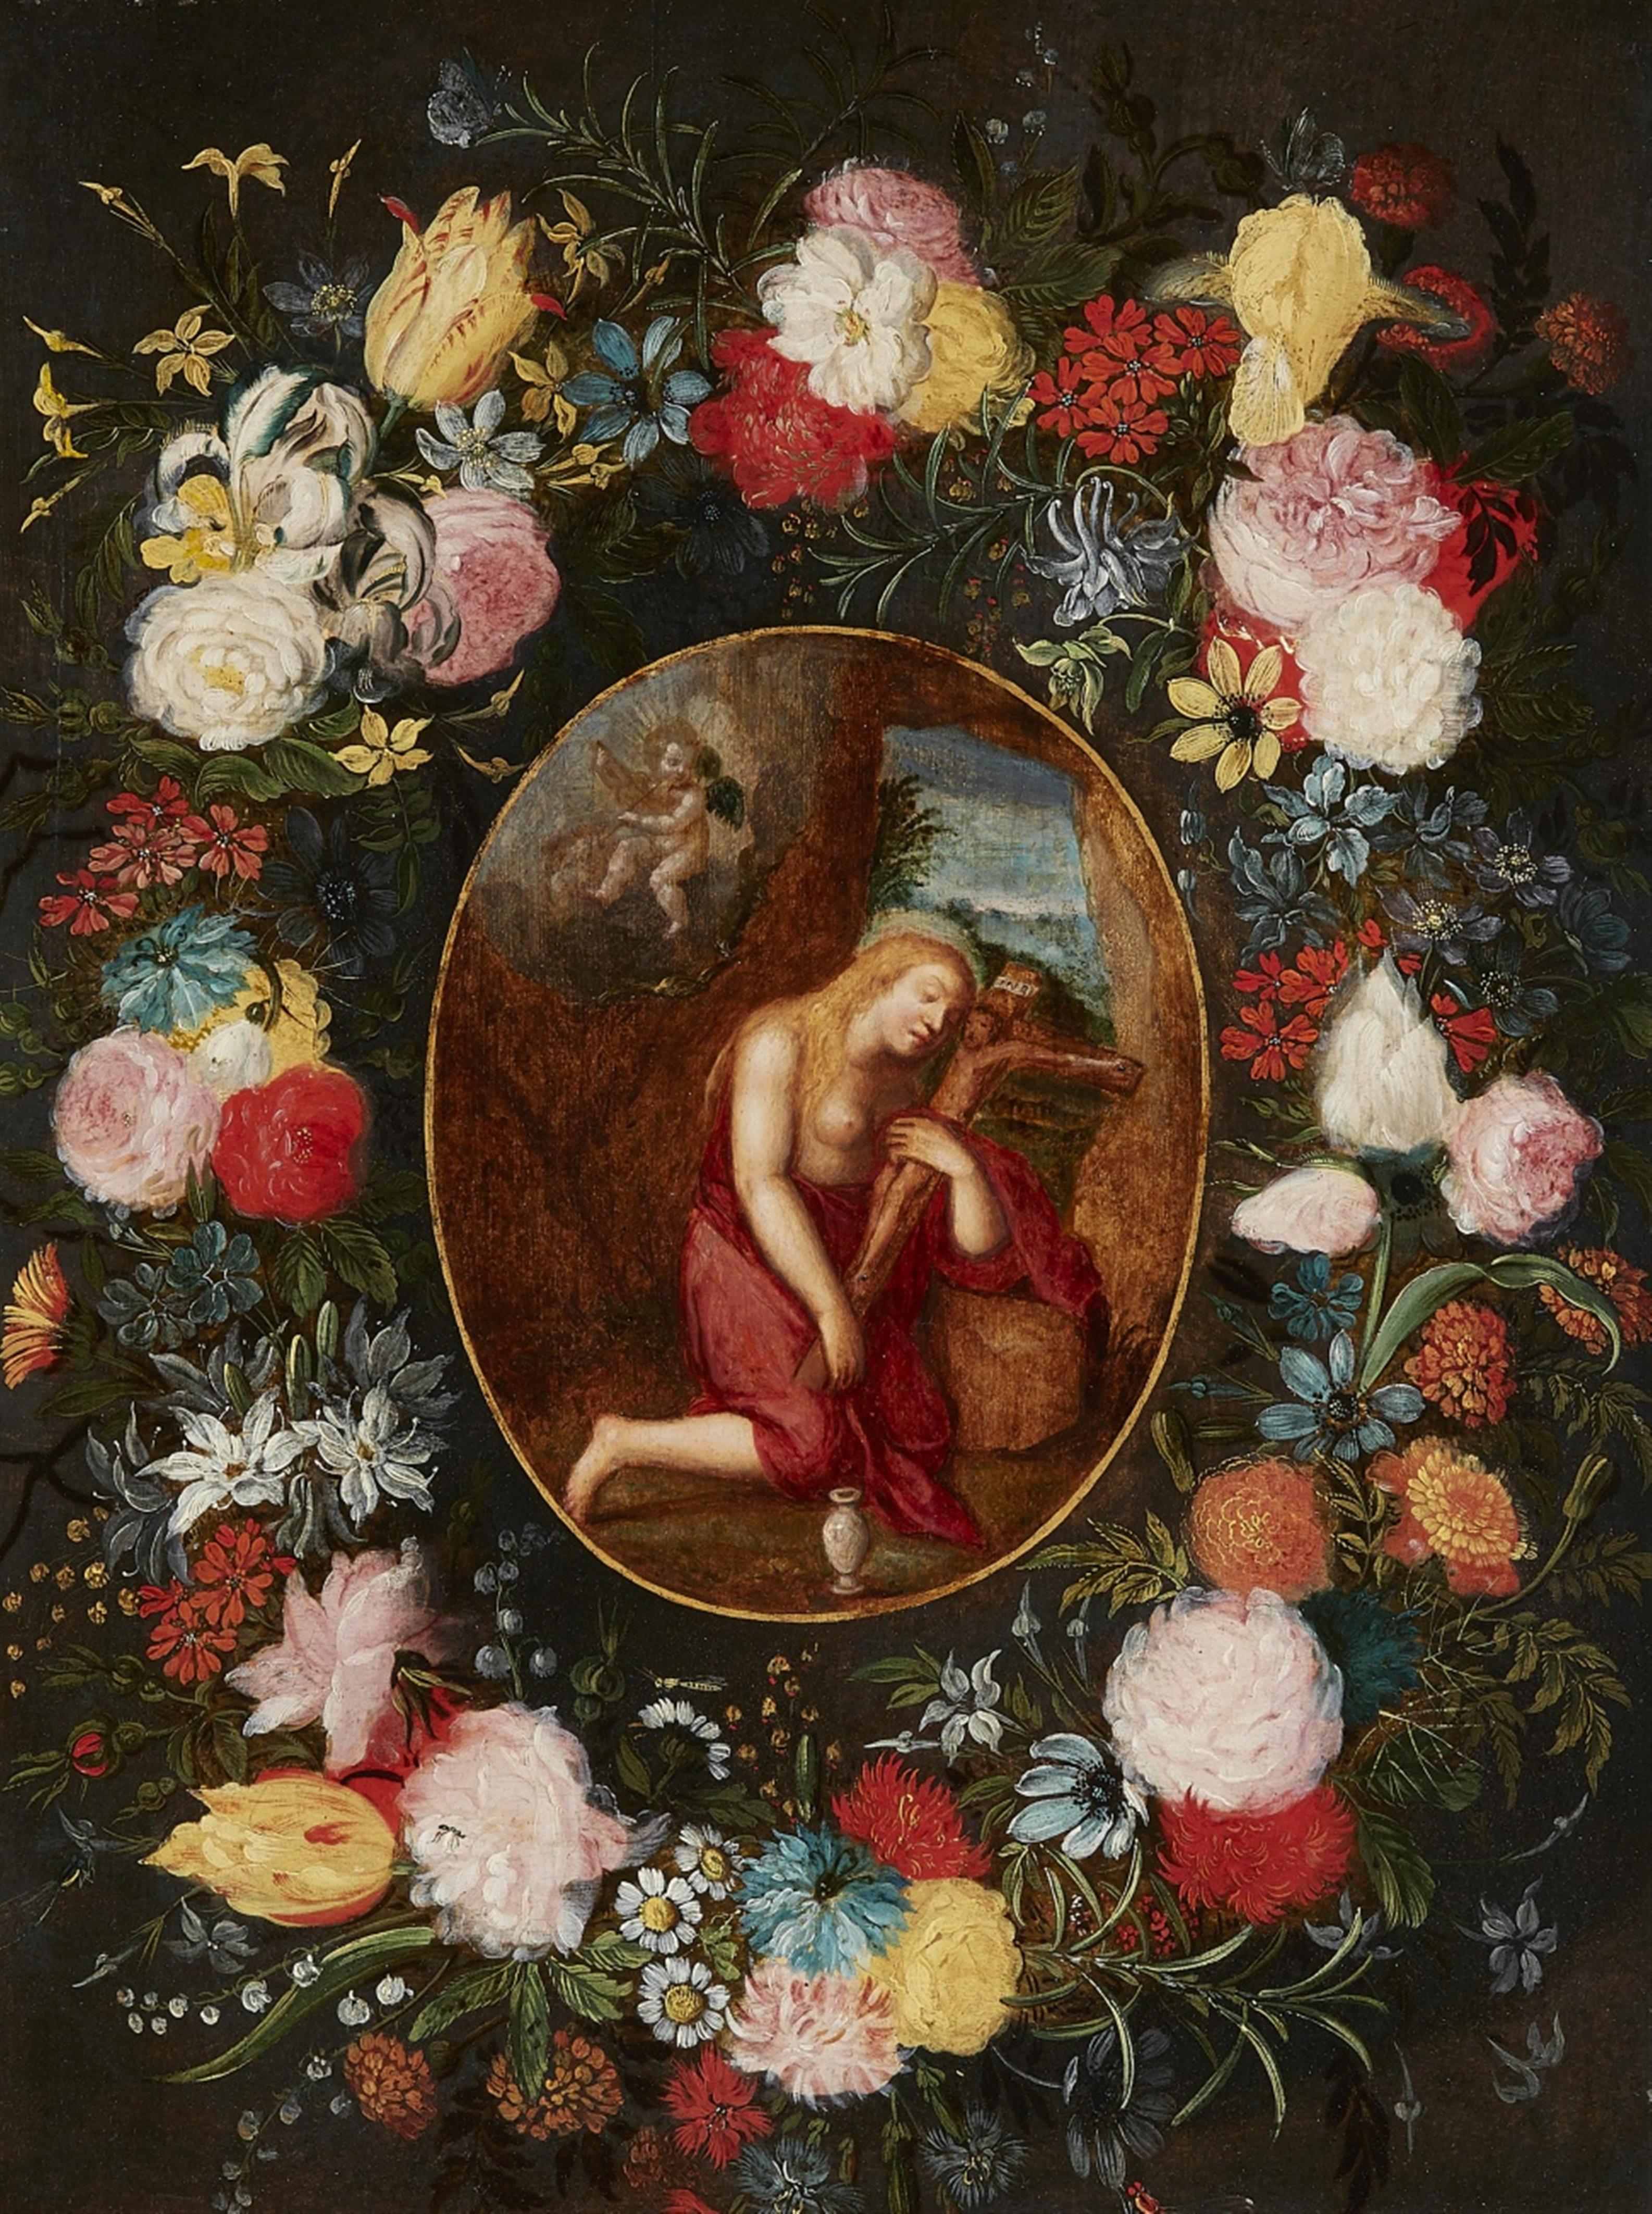 Jan Brueghel the Younger - The Penitent Mary Magdalene within a Floral Garland - image-1